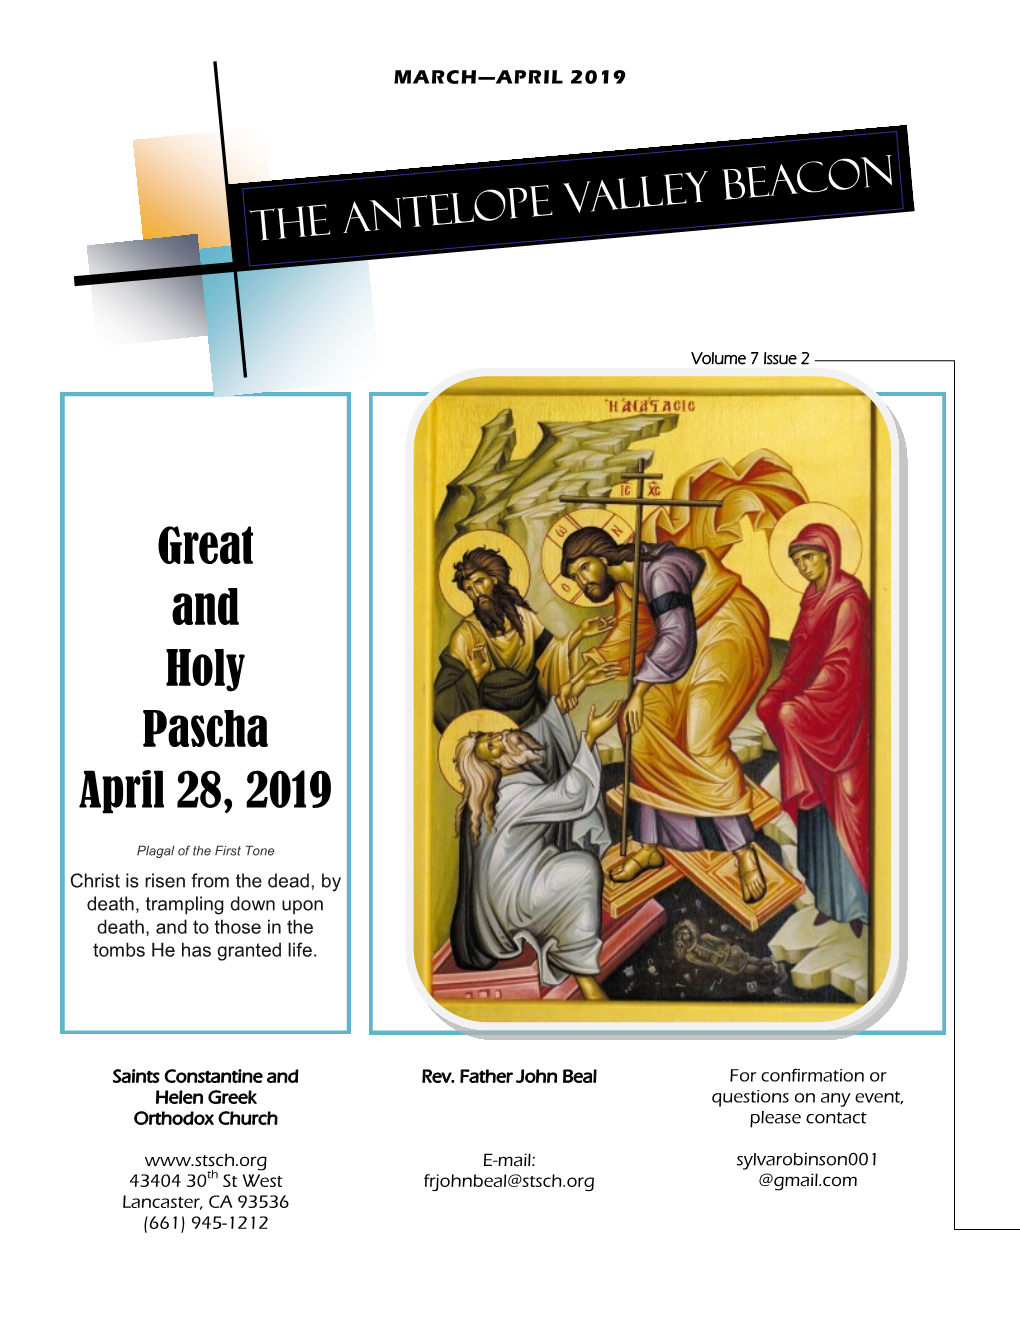 Great and Holy Pascha April 28, 2019